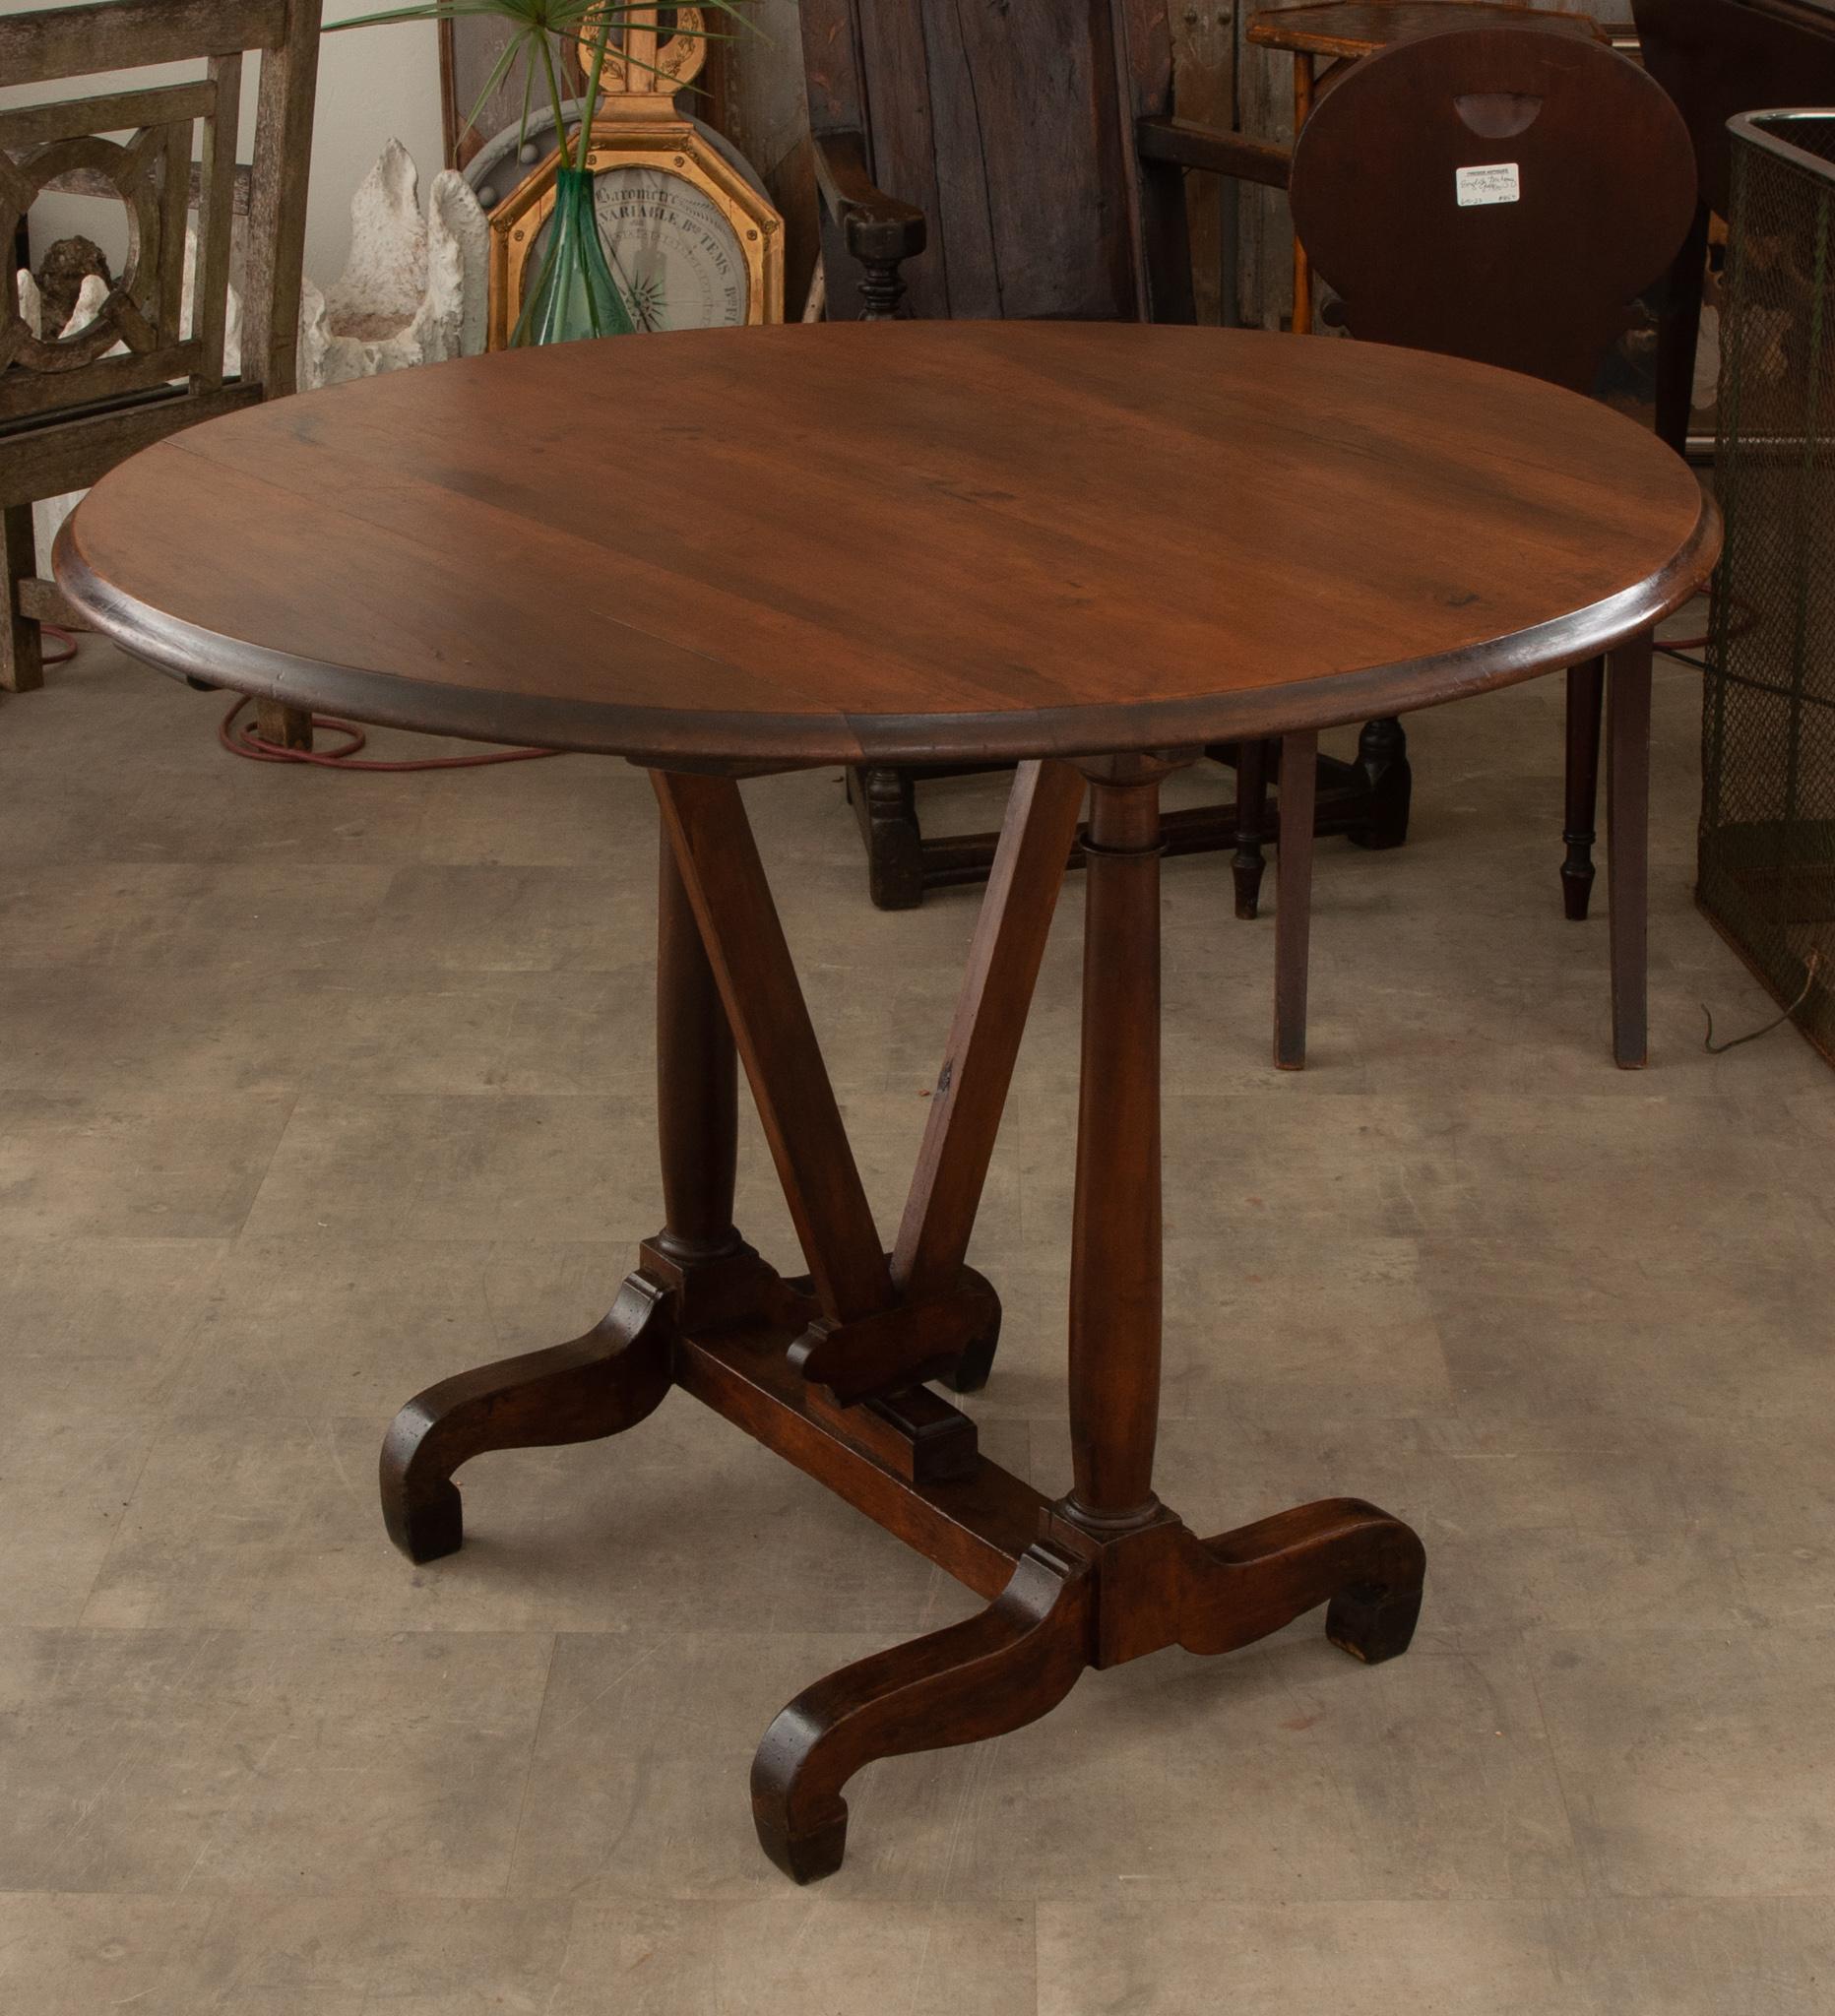 A 19th century French vintner’s wine tasting table. A specialized folding tilt-top table that was used at vineyards and wineries across Europe, providing a place to taste their different vintages. Vendange (grape harvest) tables have a tilting